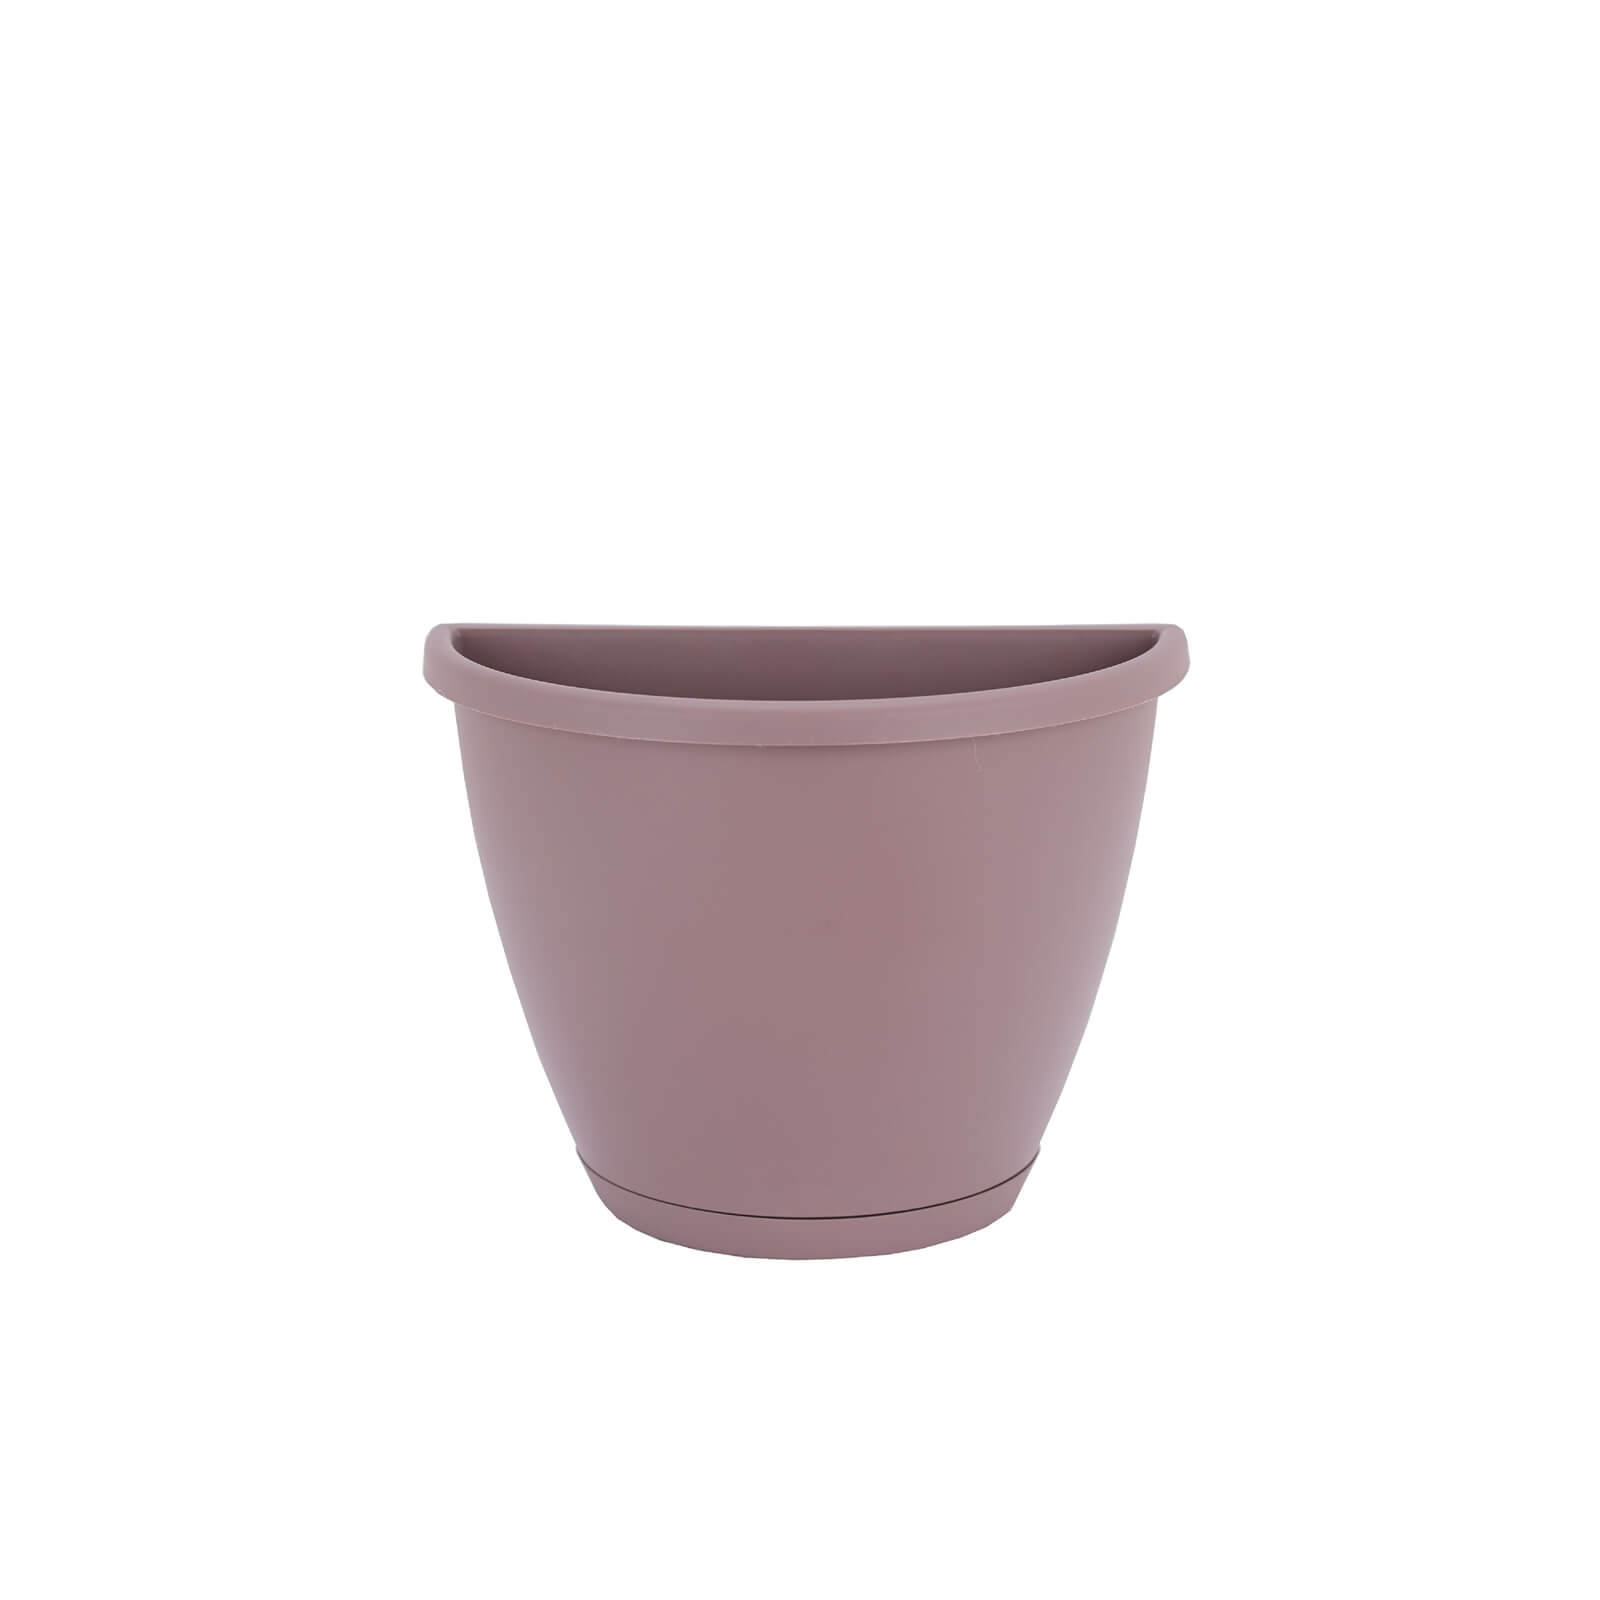 Wall Pot in Taupe - 30cm